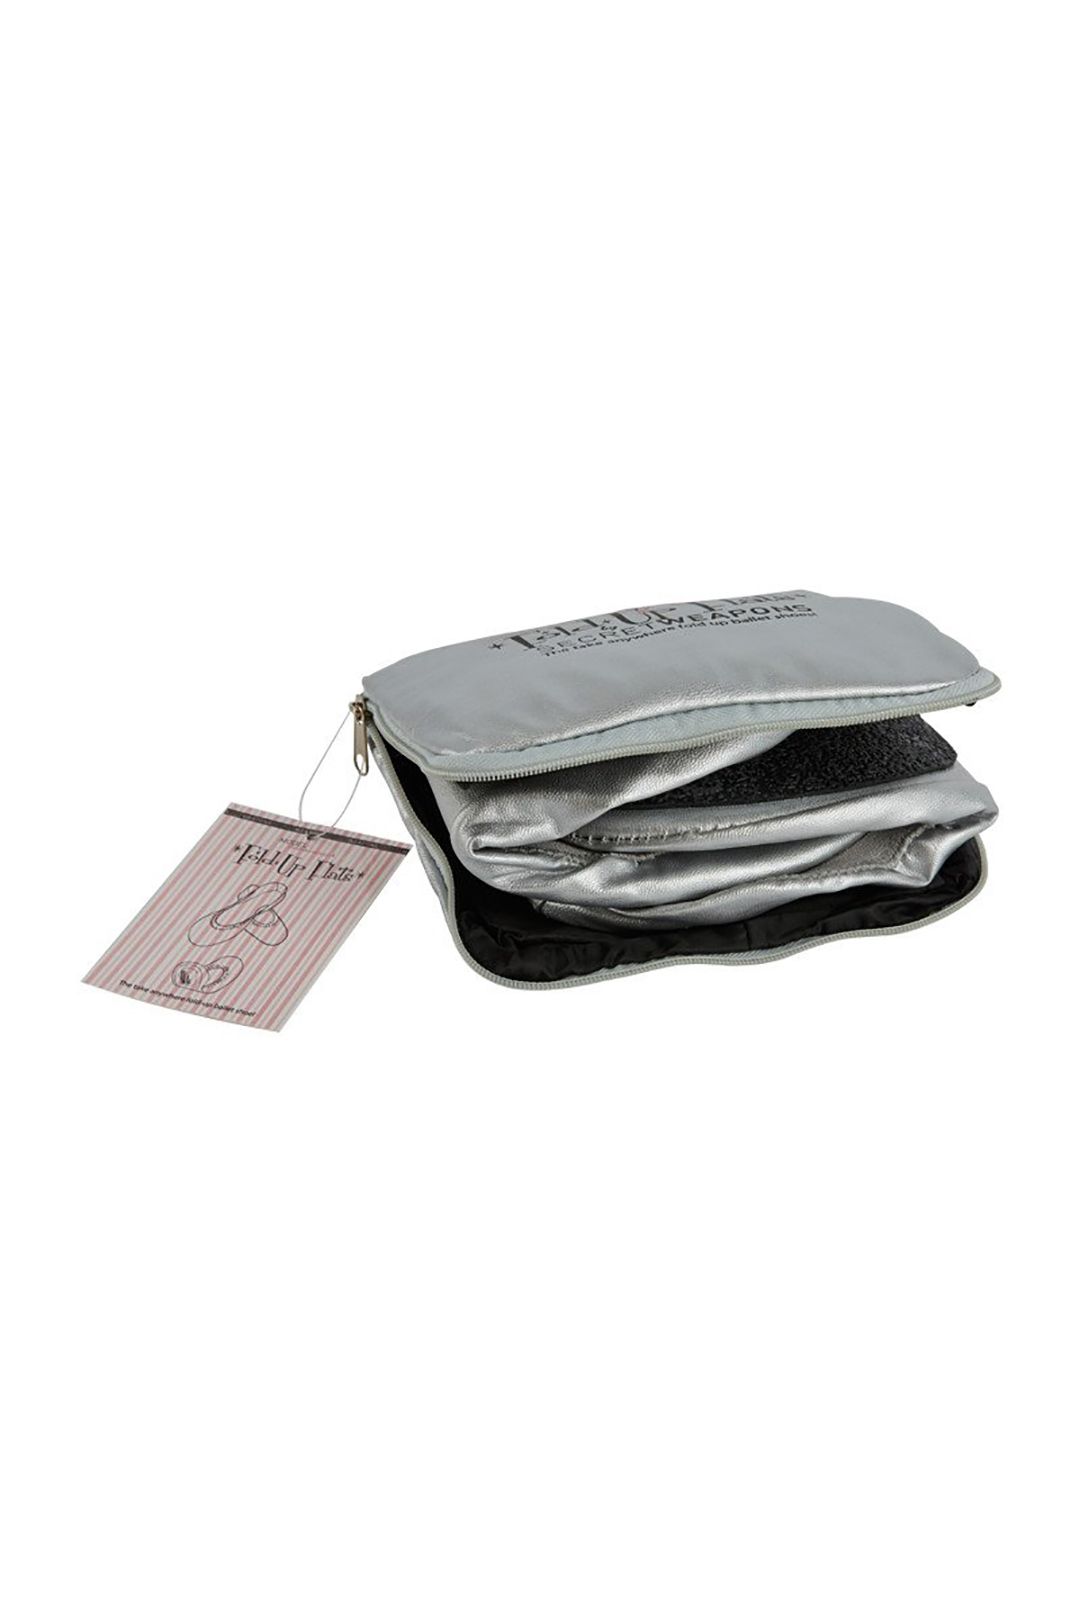 Secret Weapons - Fold Up Flats - Silver - Pouch